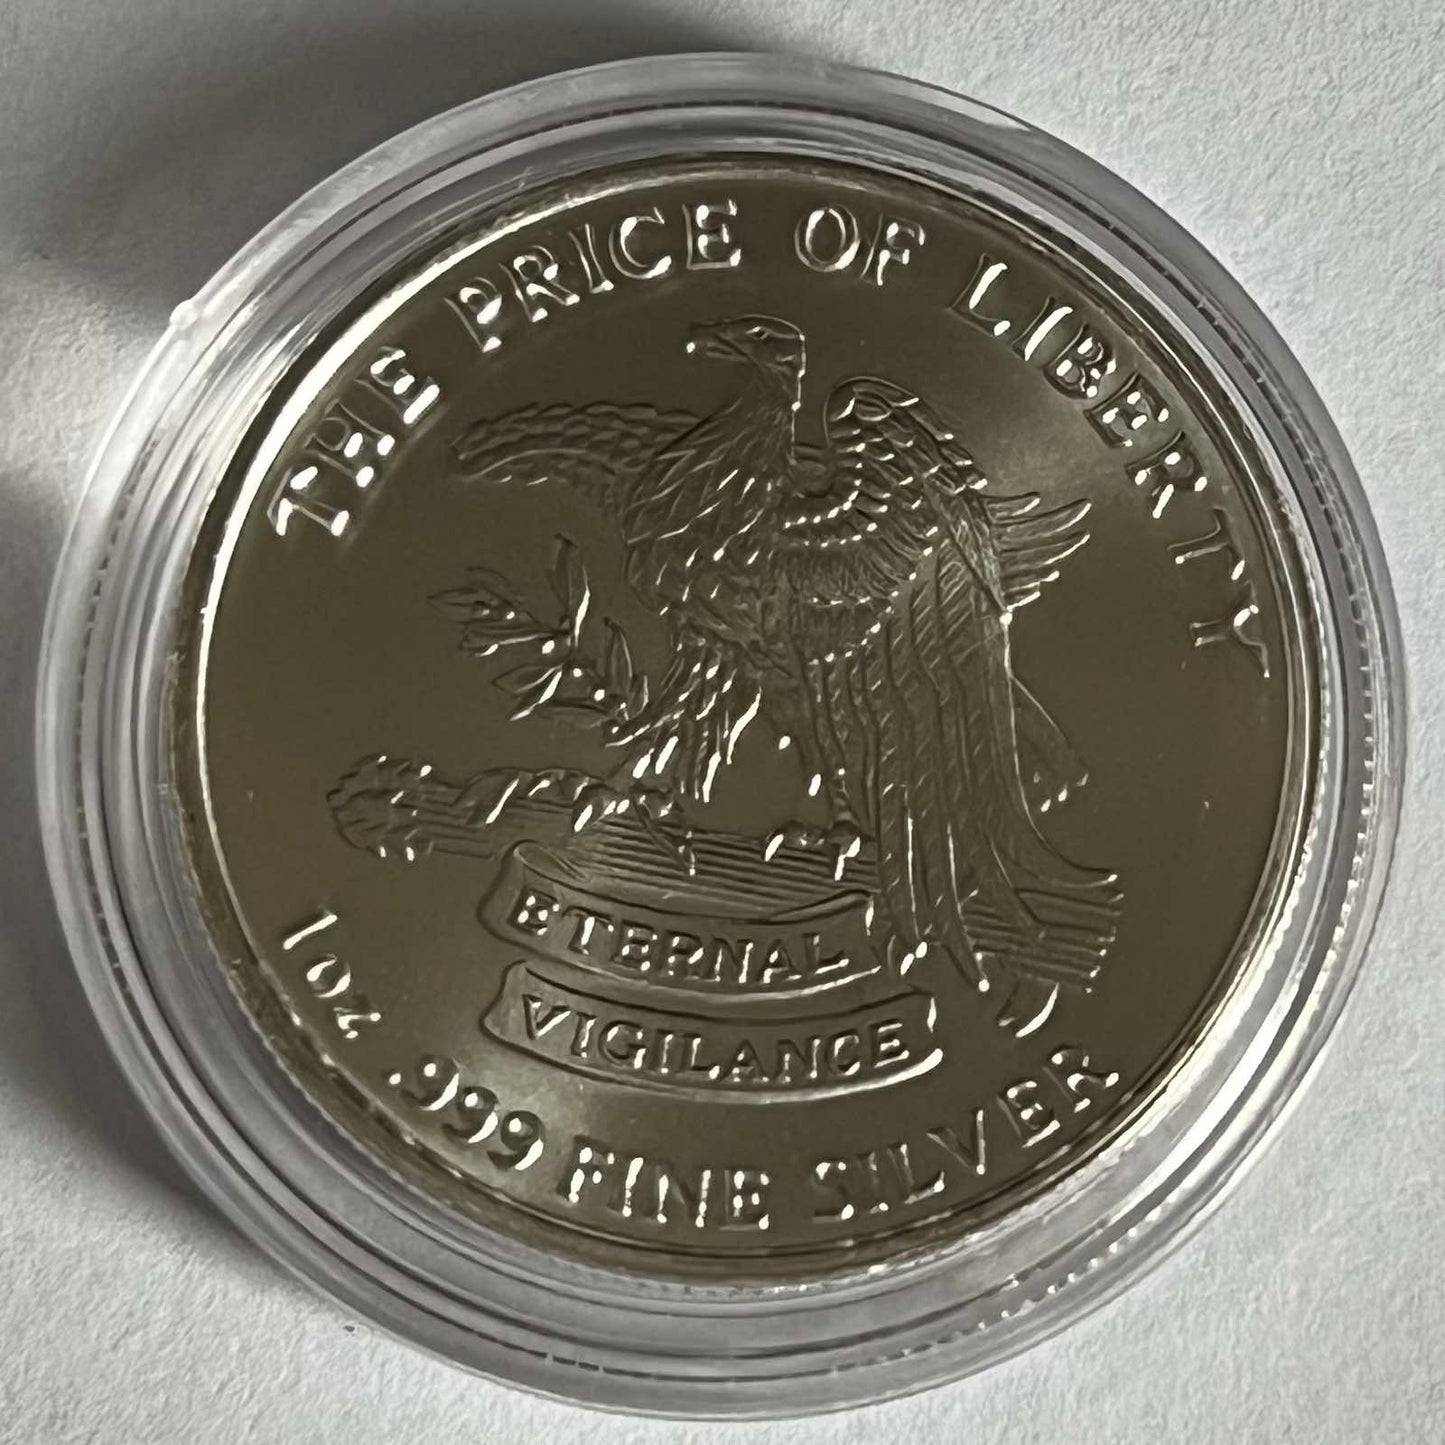 Don't Tread on Me 1 oz Silver Round in Capsule